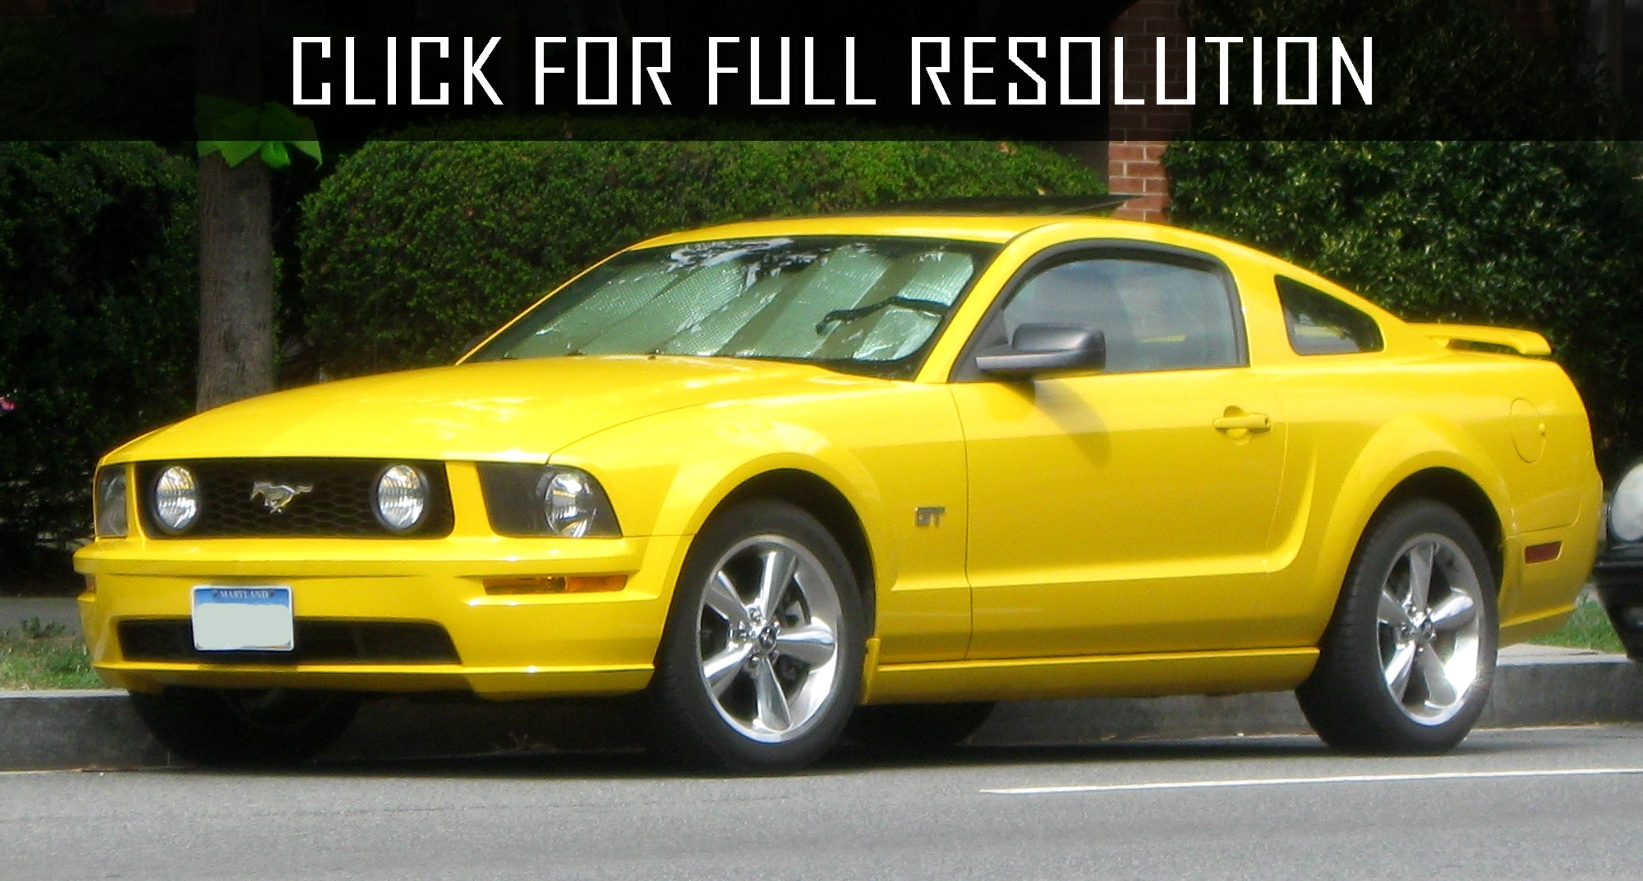 2009 Ford Mustang Gt